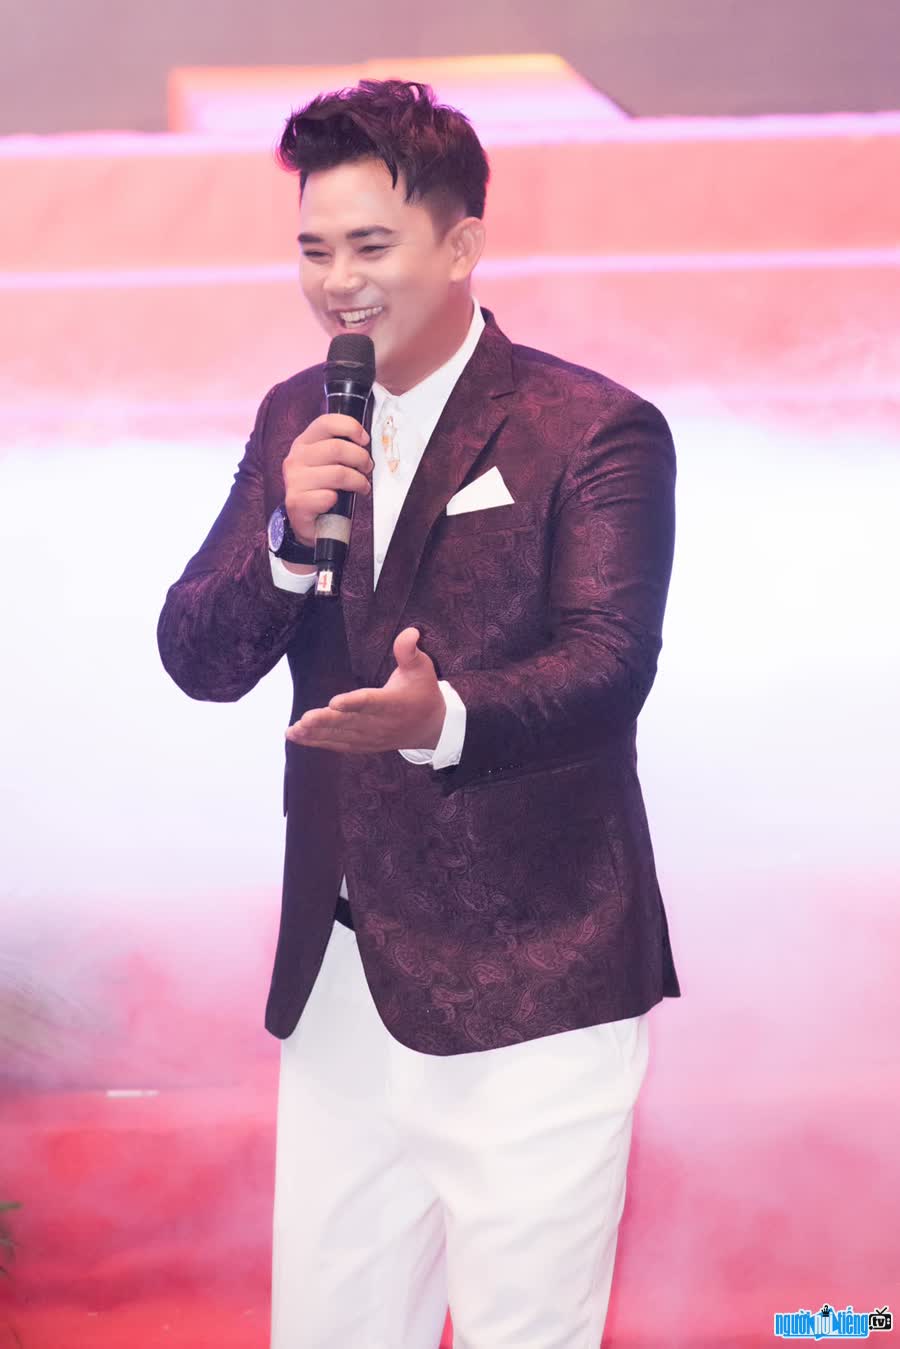 Le Quoc Khang is known as a favorite singer through songs about his homeland